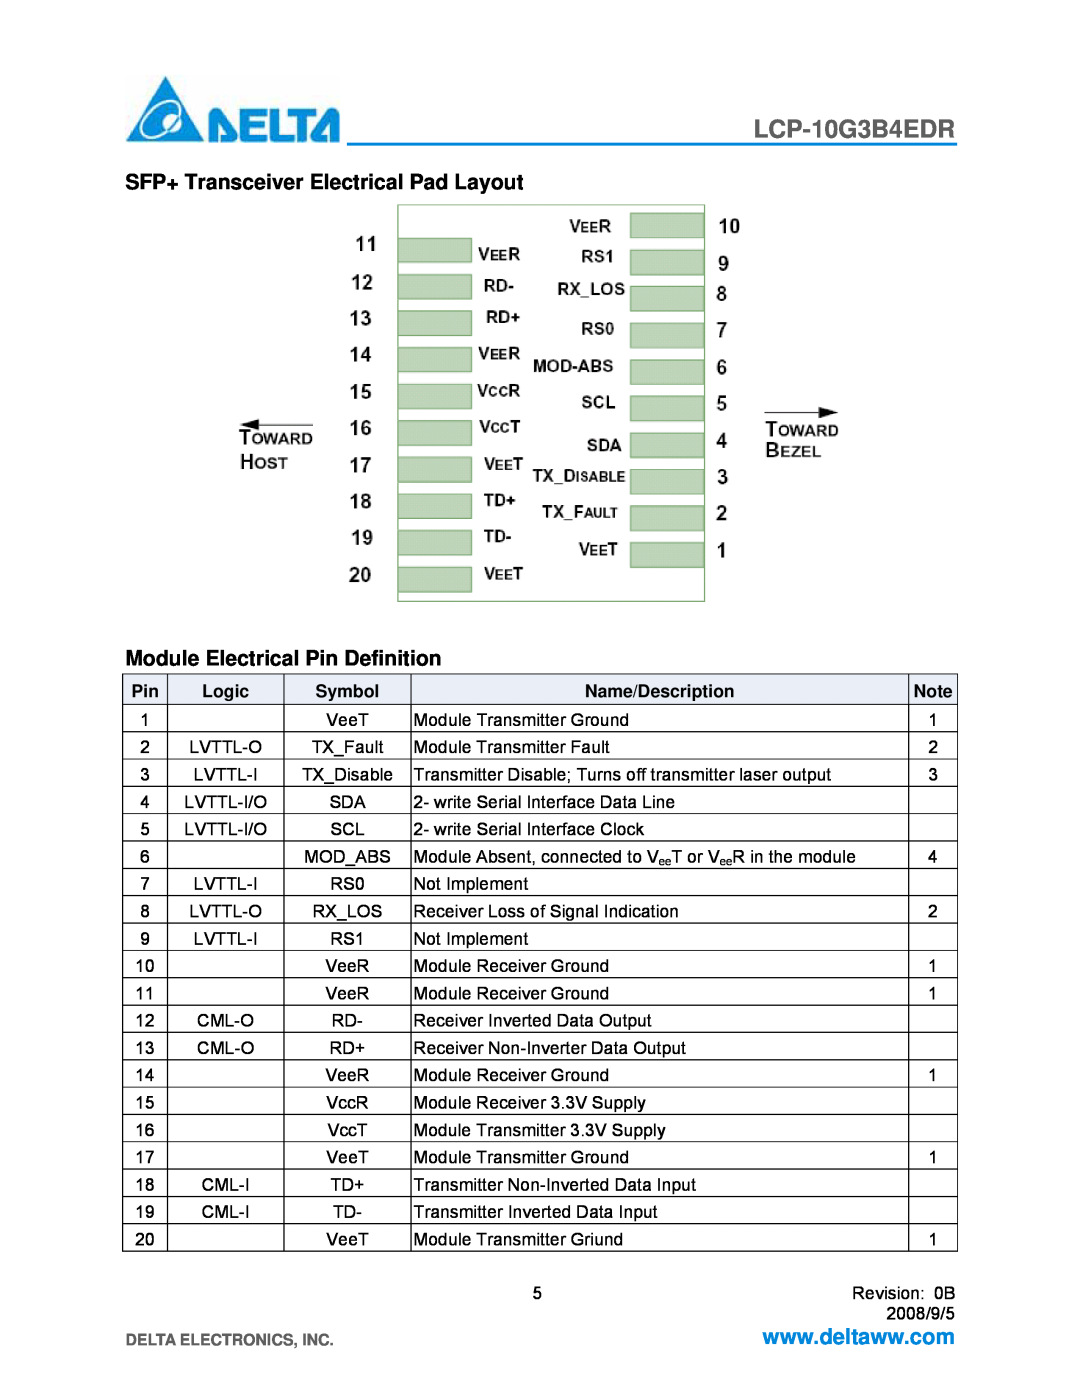 Delta Electronics LCP-10G3B4EDR SFP+ Transceiver Electrical Pad Layout, Module Electrical Pin Definition, Logic, Symbol 